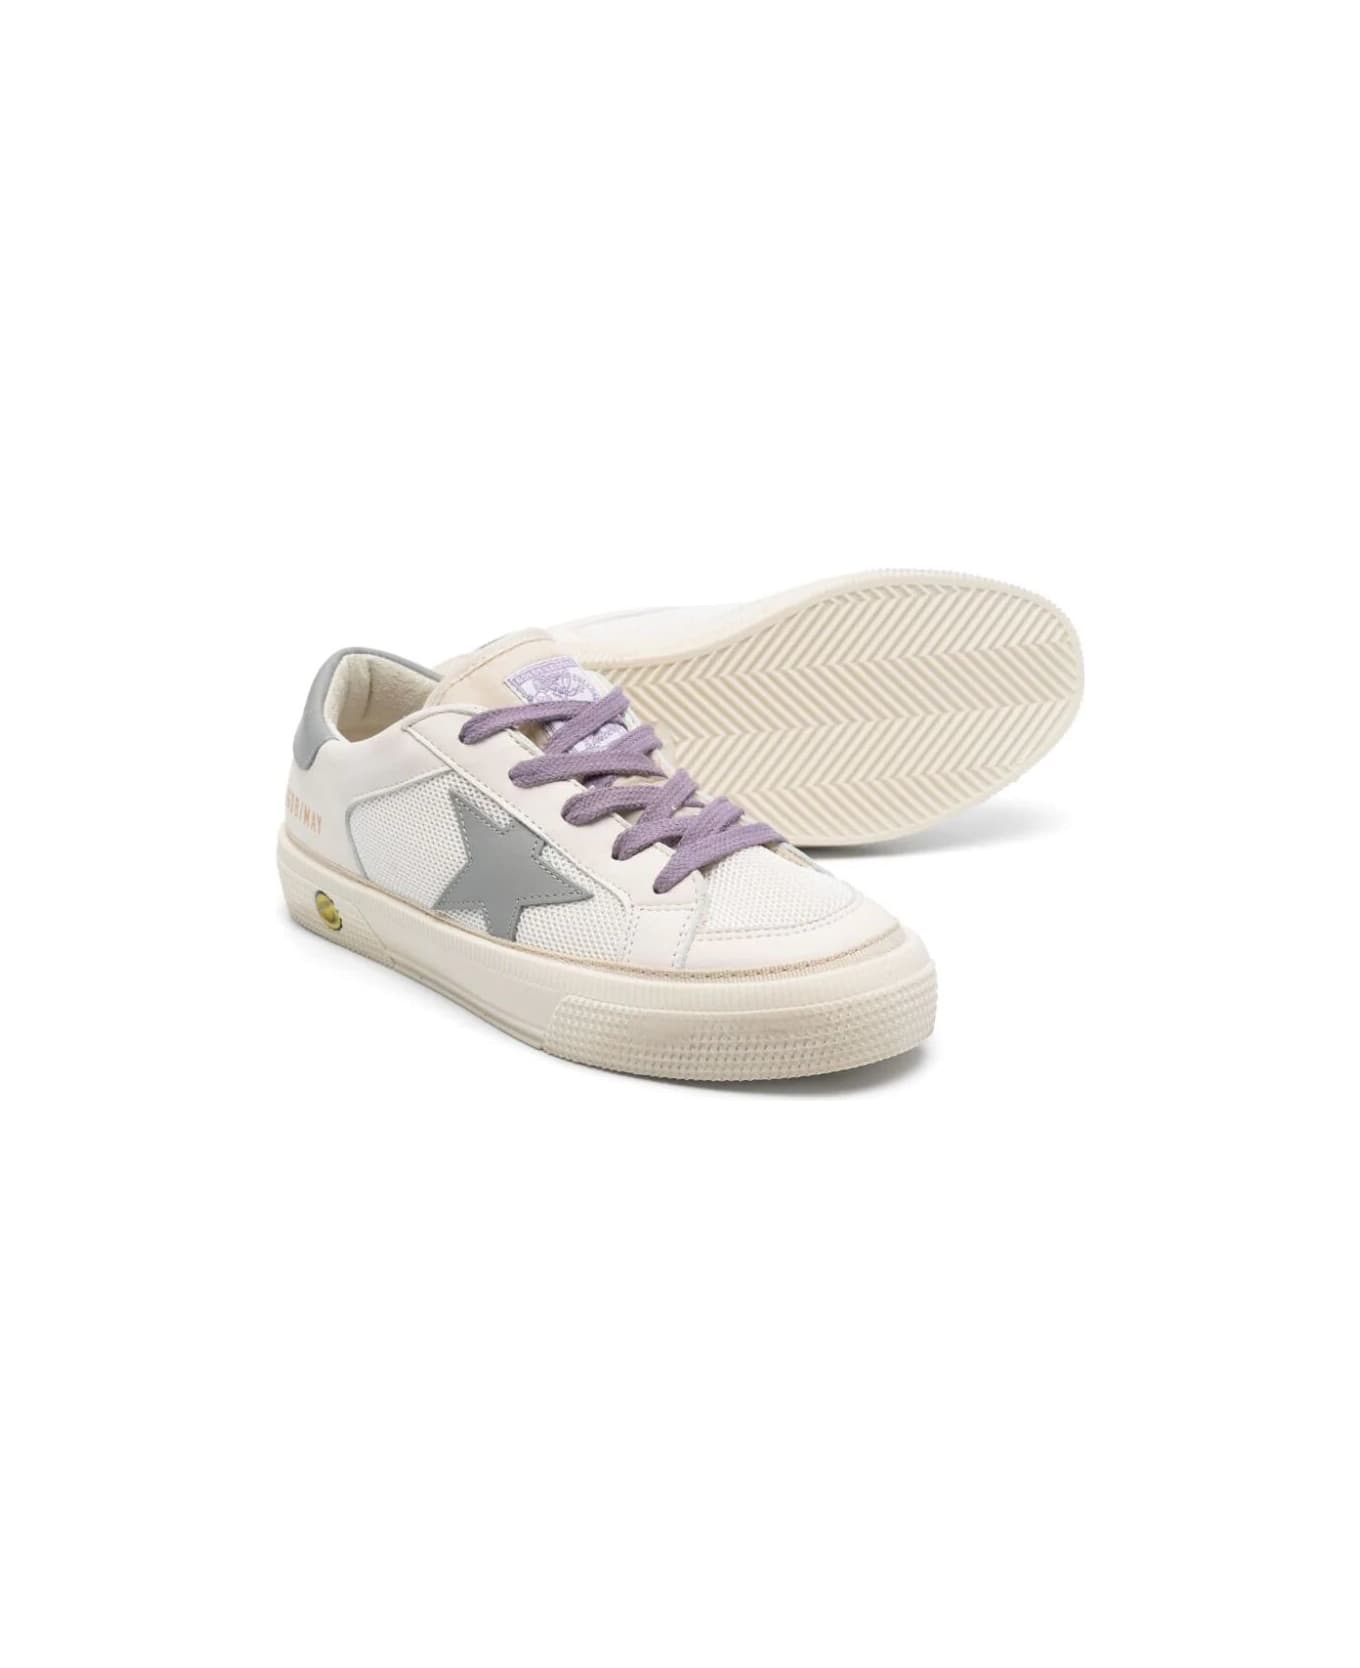 Golden Goose May Nappa And Net Upper Leather Star And Heel Nylo Tongue - White Grey